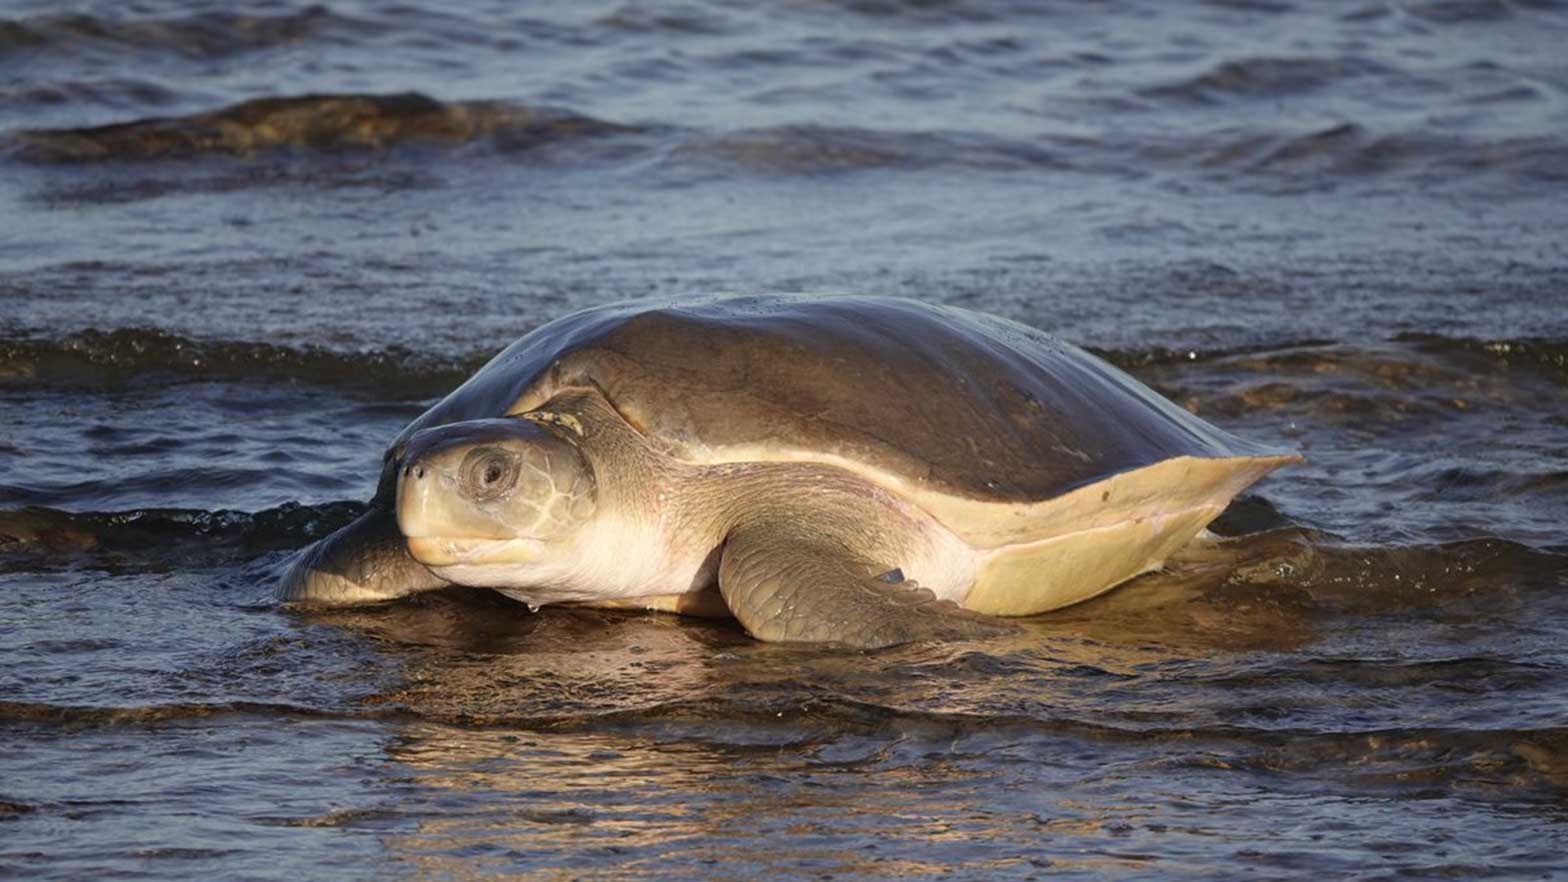 An identification tag can be seen on the flipper of this flatback turtle.